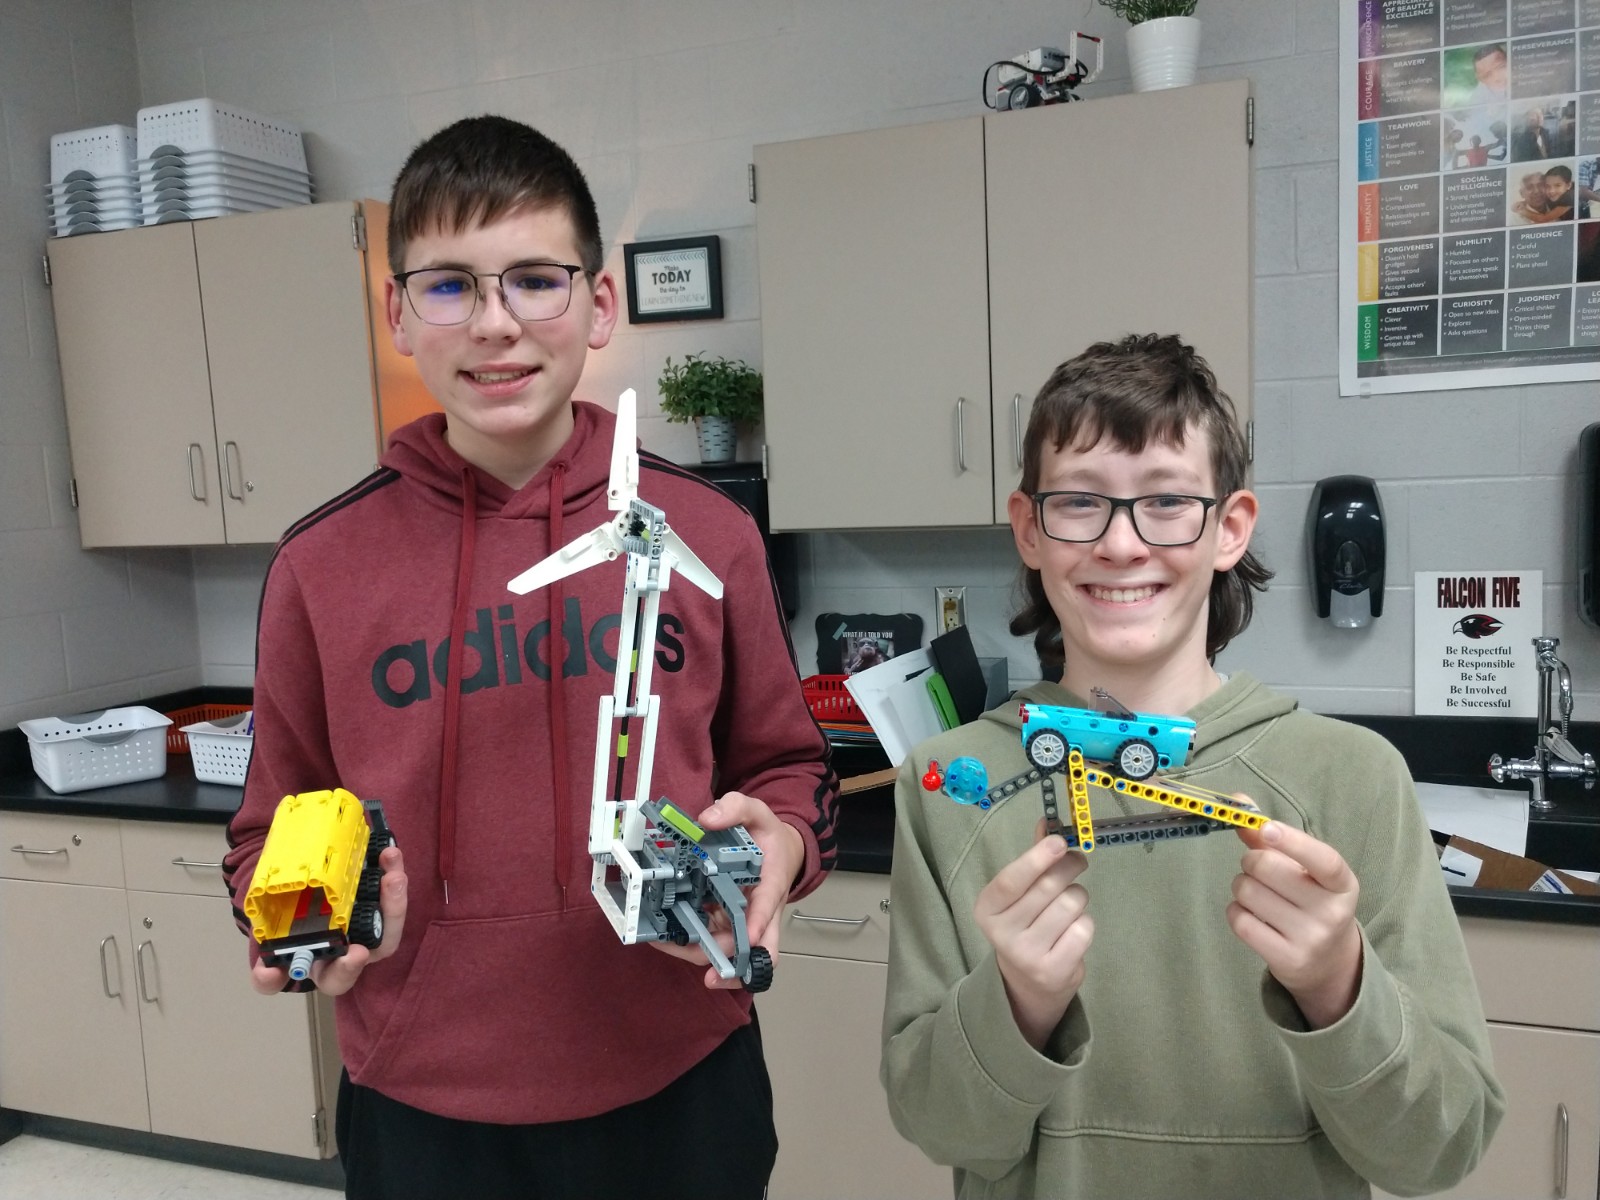 Two students show off their robotic club work